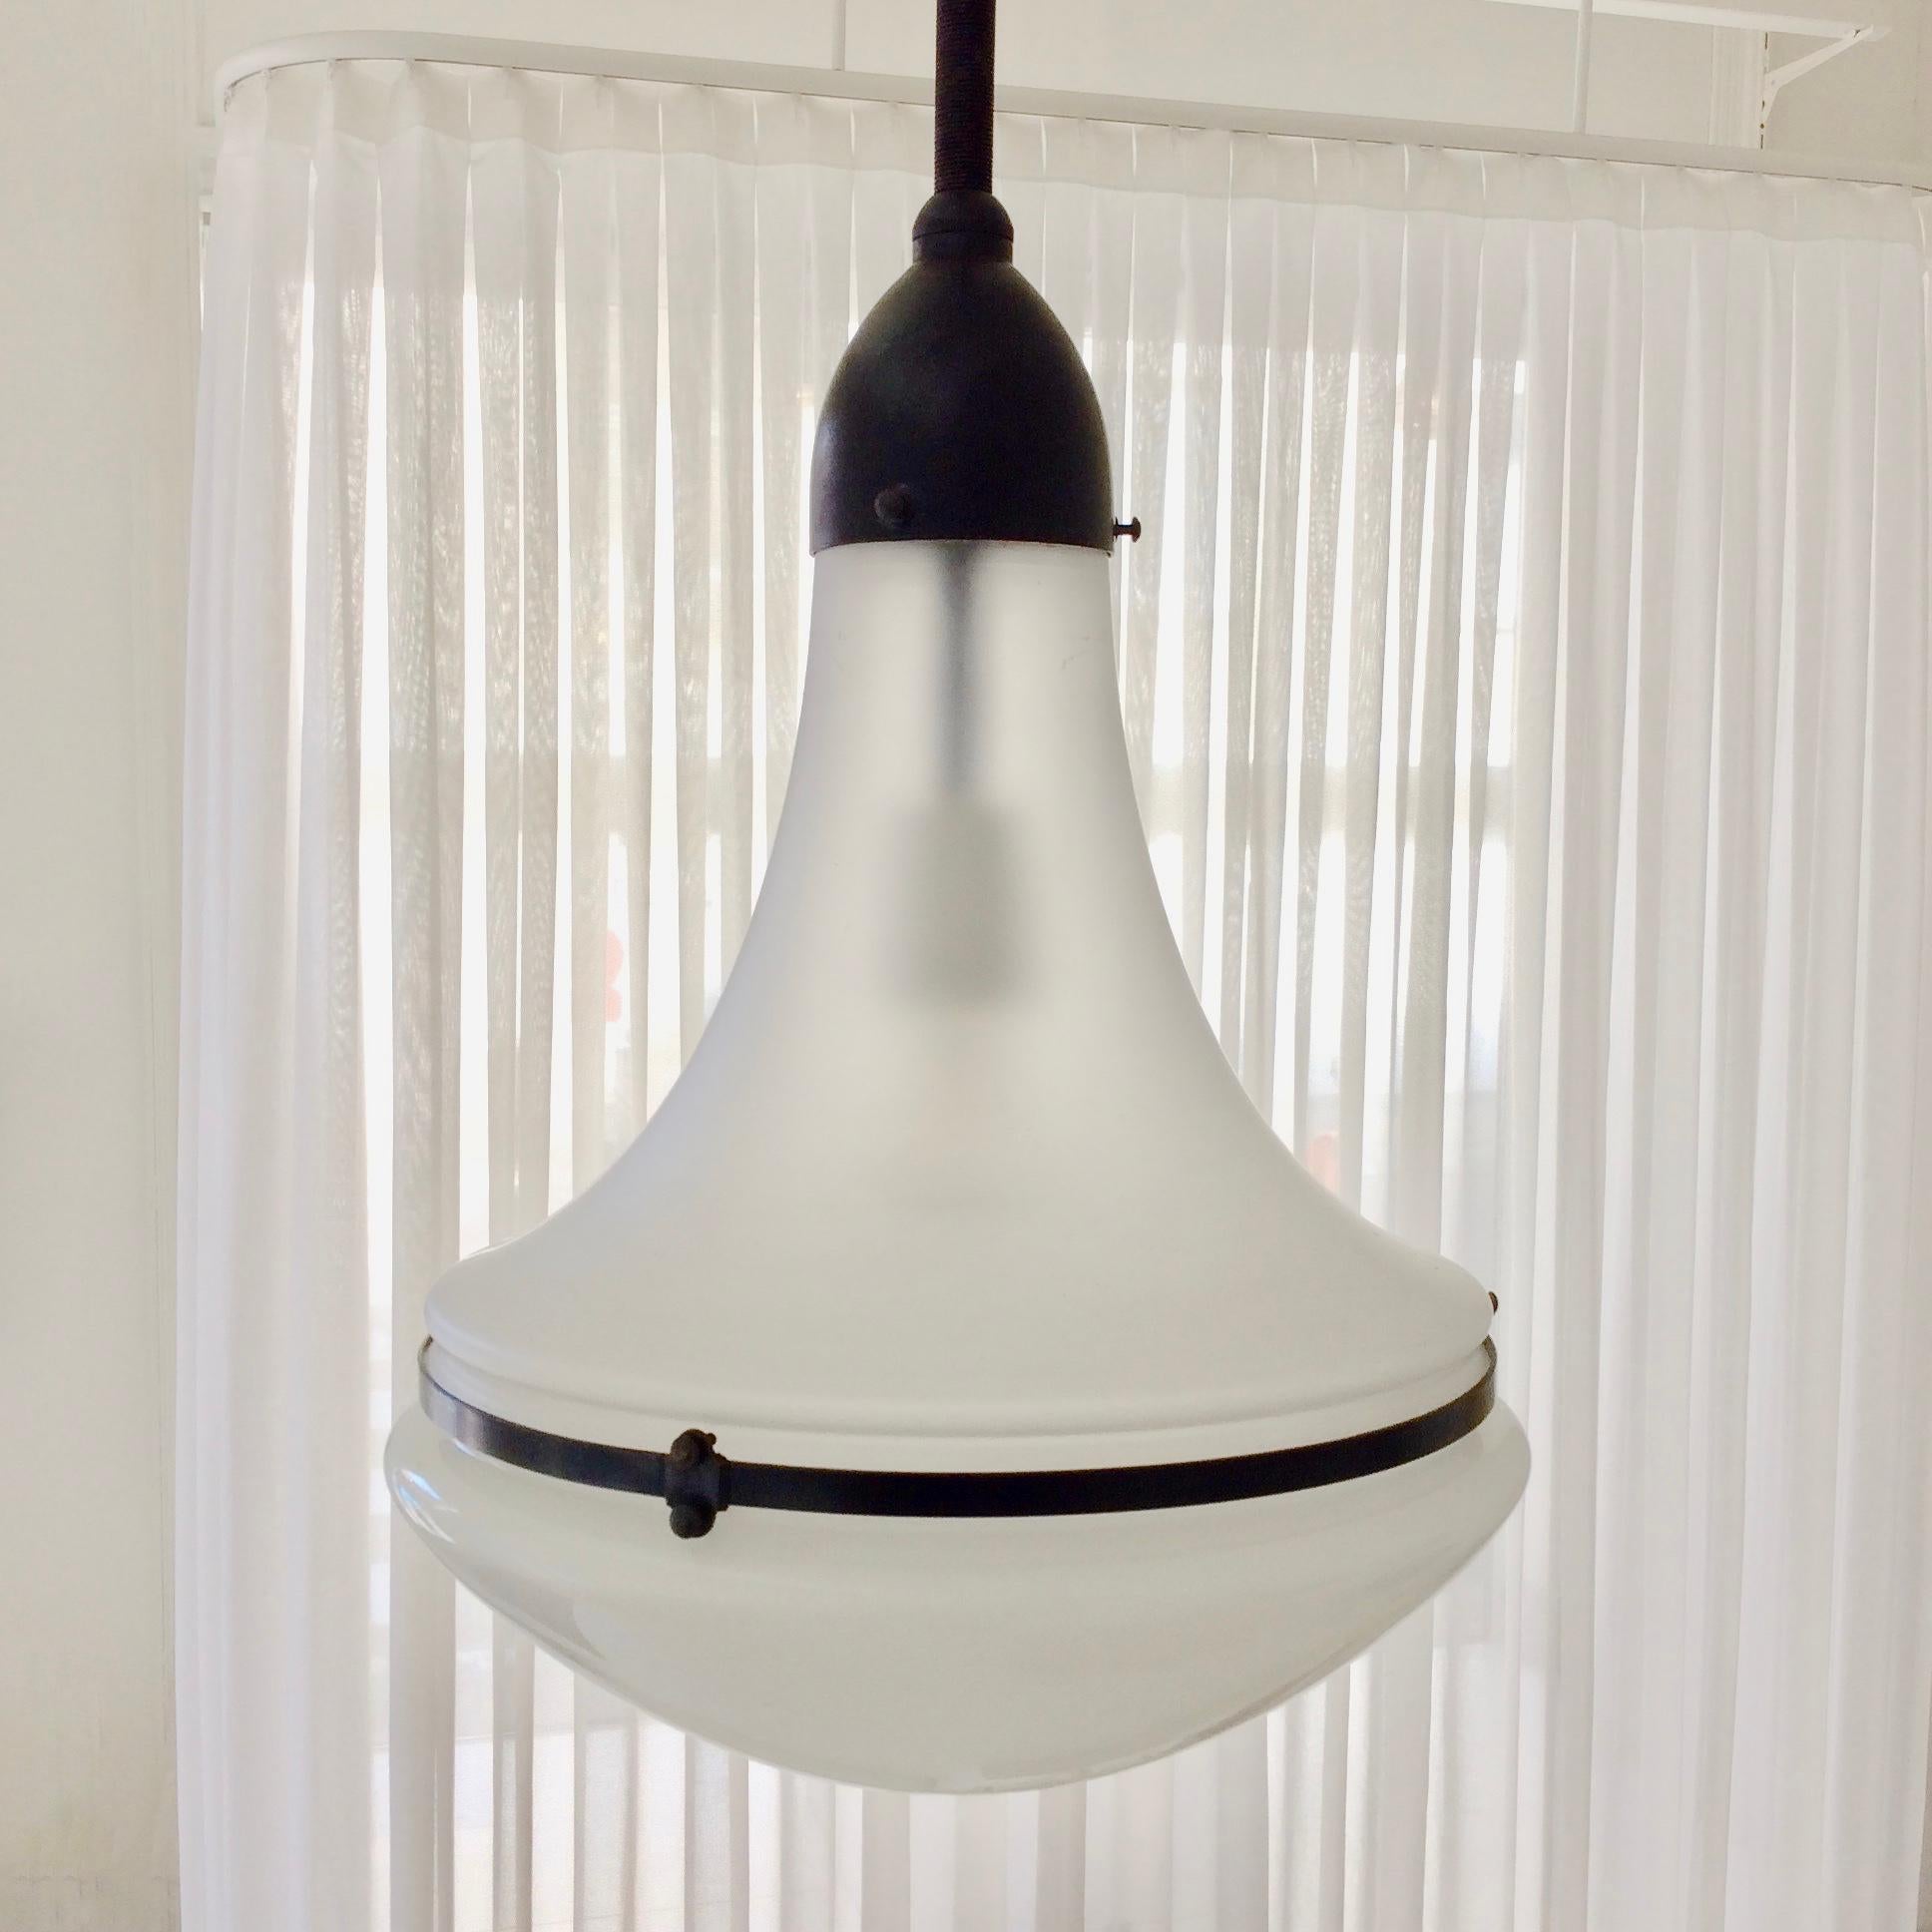 Peter Behrens Luzette pendant lamp, circa 1910, Germany.
Opaline white glass and frosted glass are assembled by metal ring and screws in patinated metal.
One E 27 bulb of 60 W.
Original chain, original condition.
Dimensions: 124 cm height, diameter